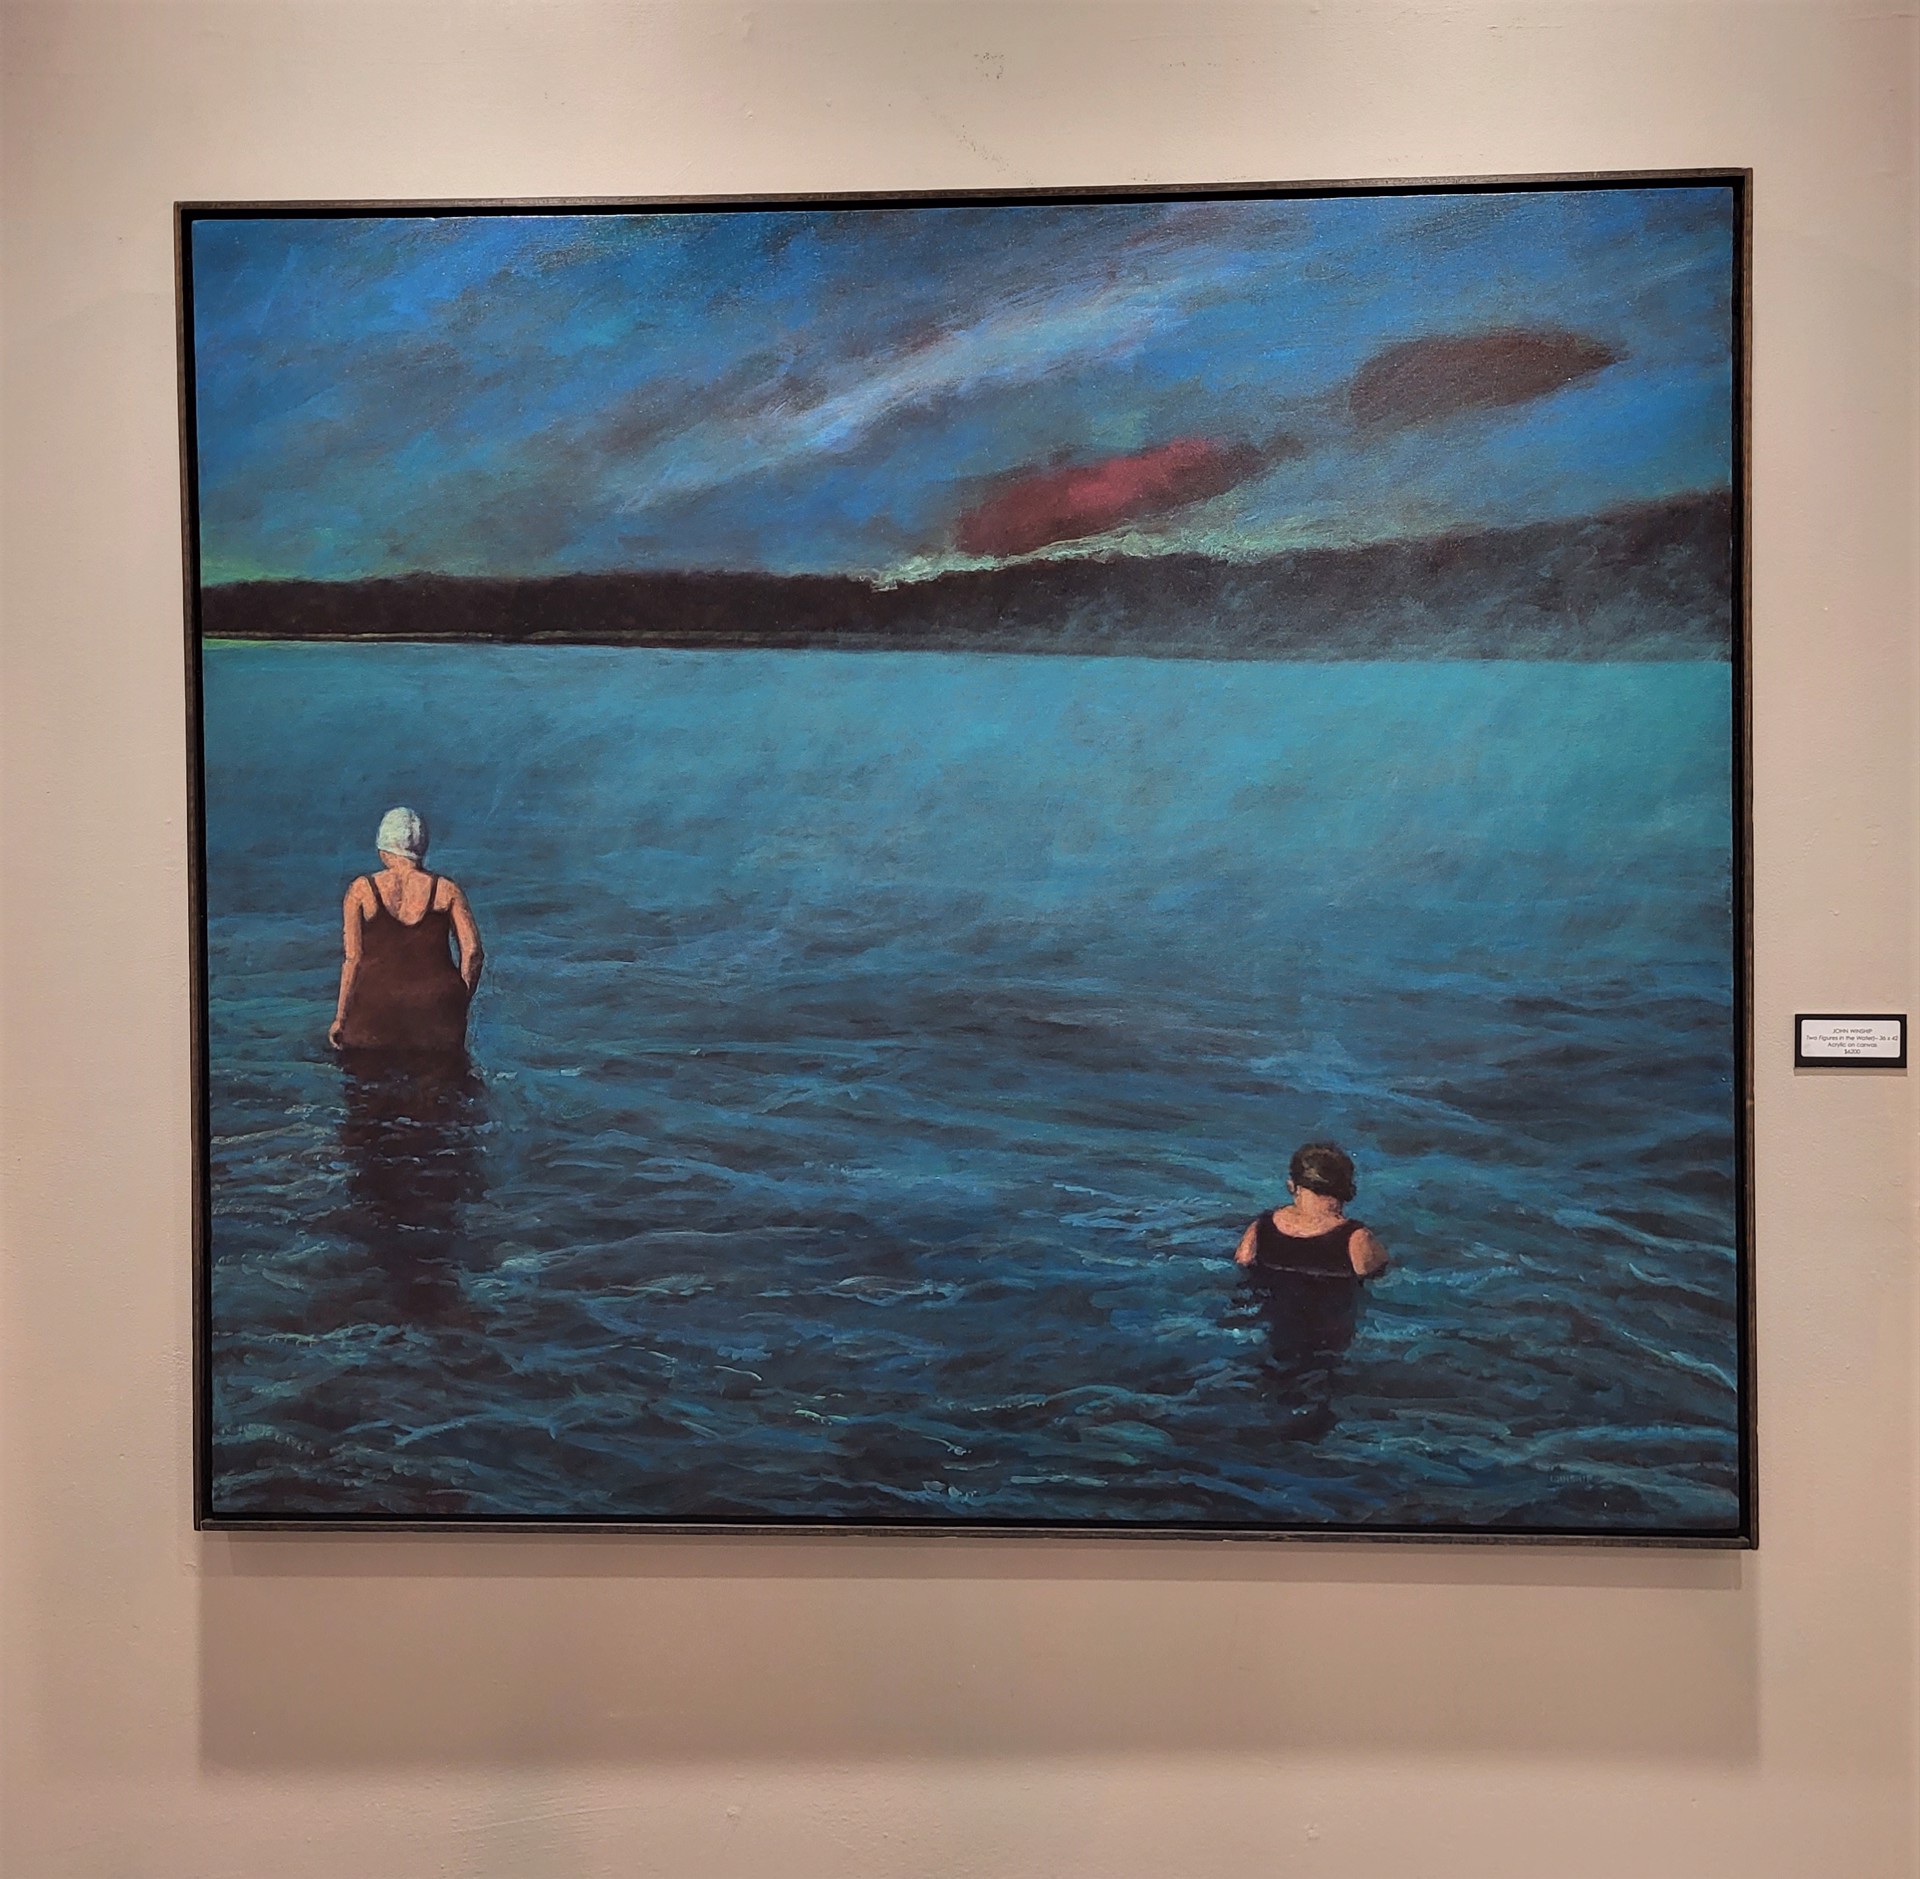 TWO FIGURES IN THE WATER by JOHN WINSHIP